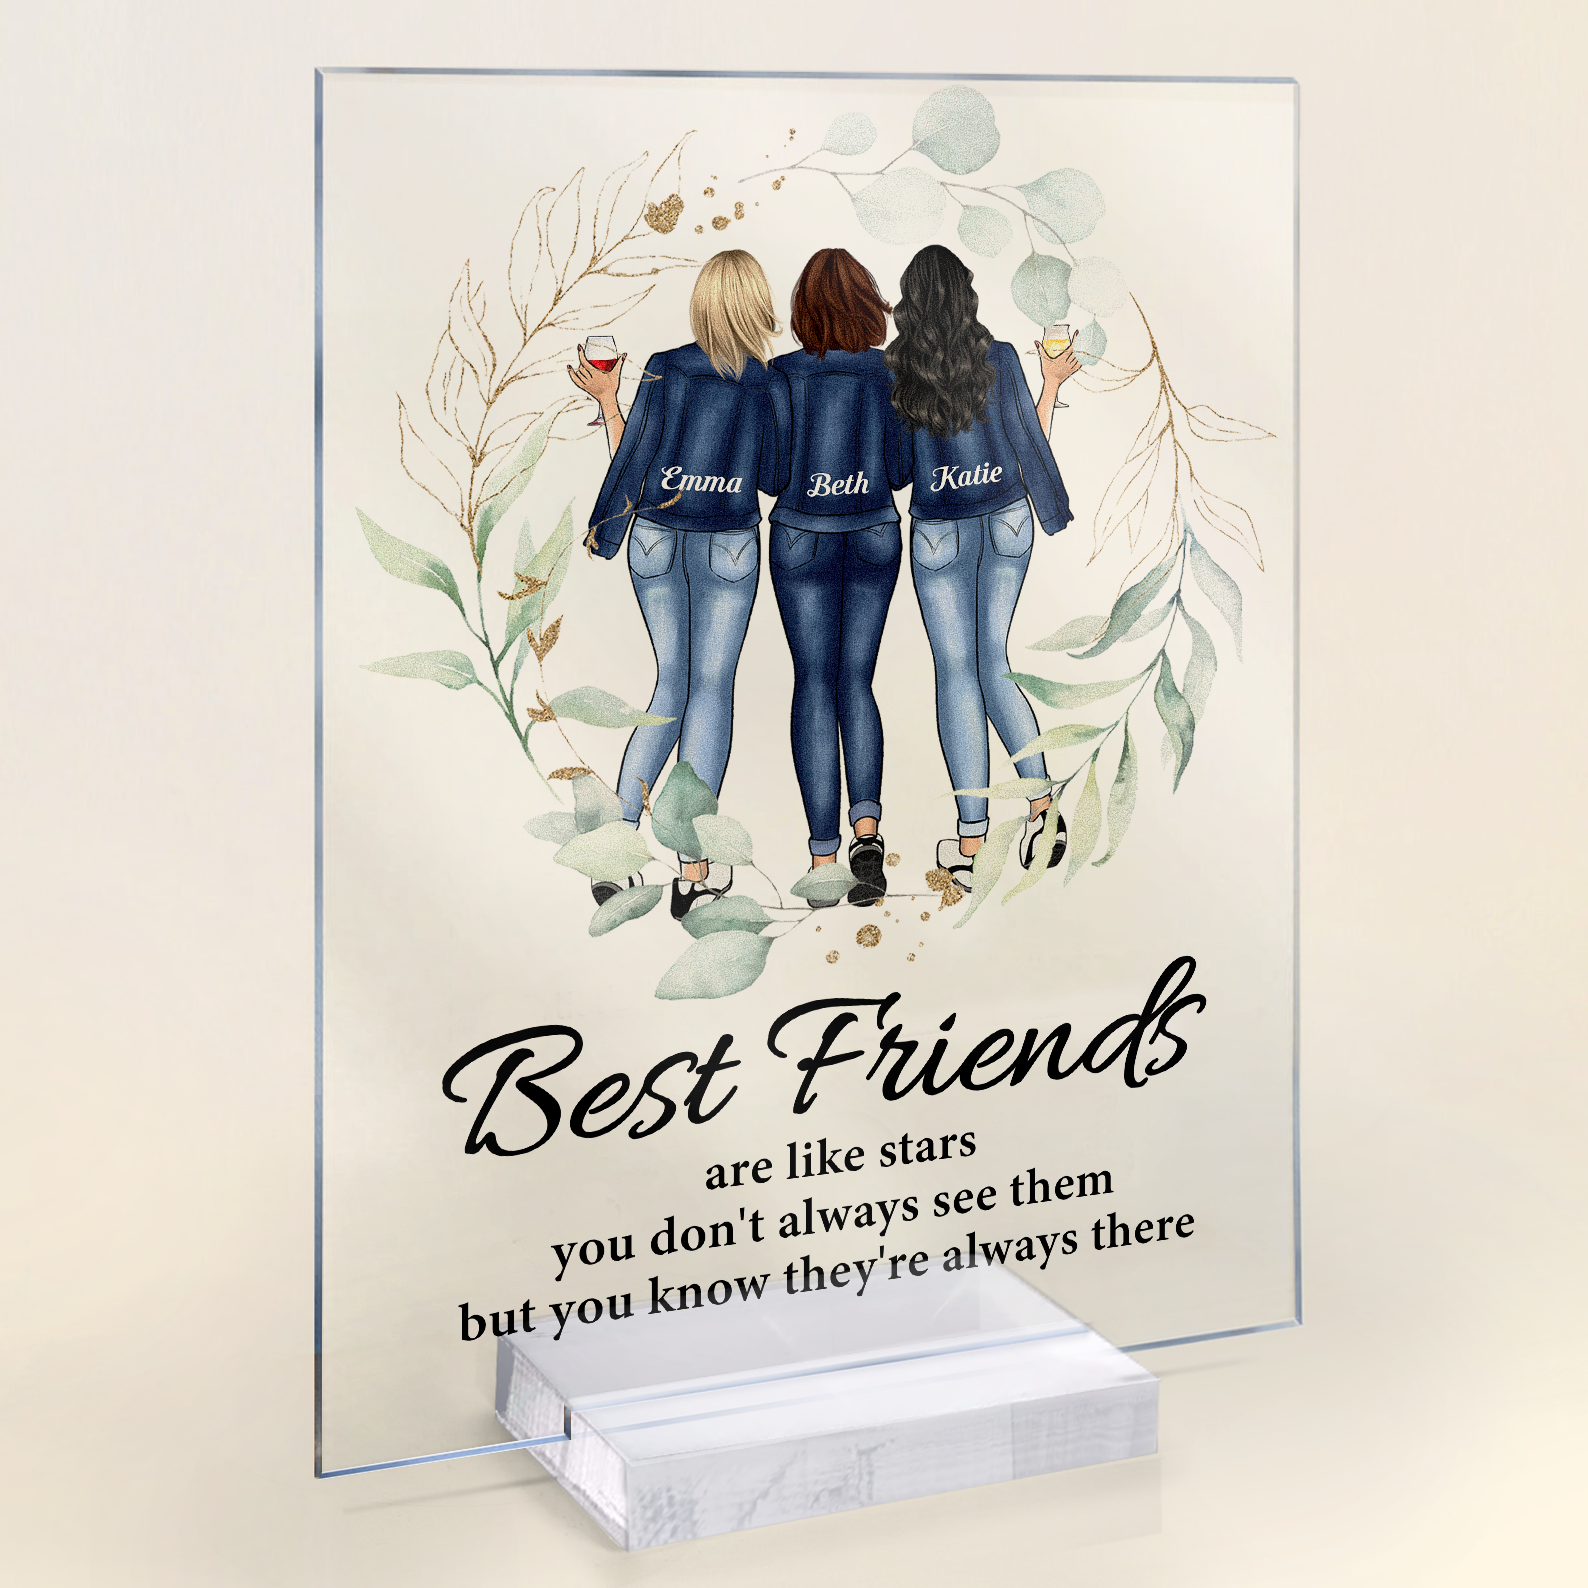 Besties Sisters Make The Good Times Better - Personalized Acrylic Plaque - Birthday, New Year Gift For Besties, Sisters, Sistas